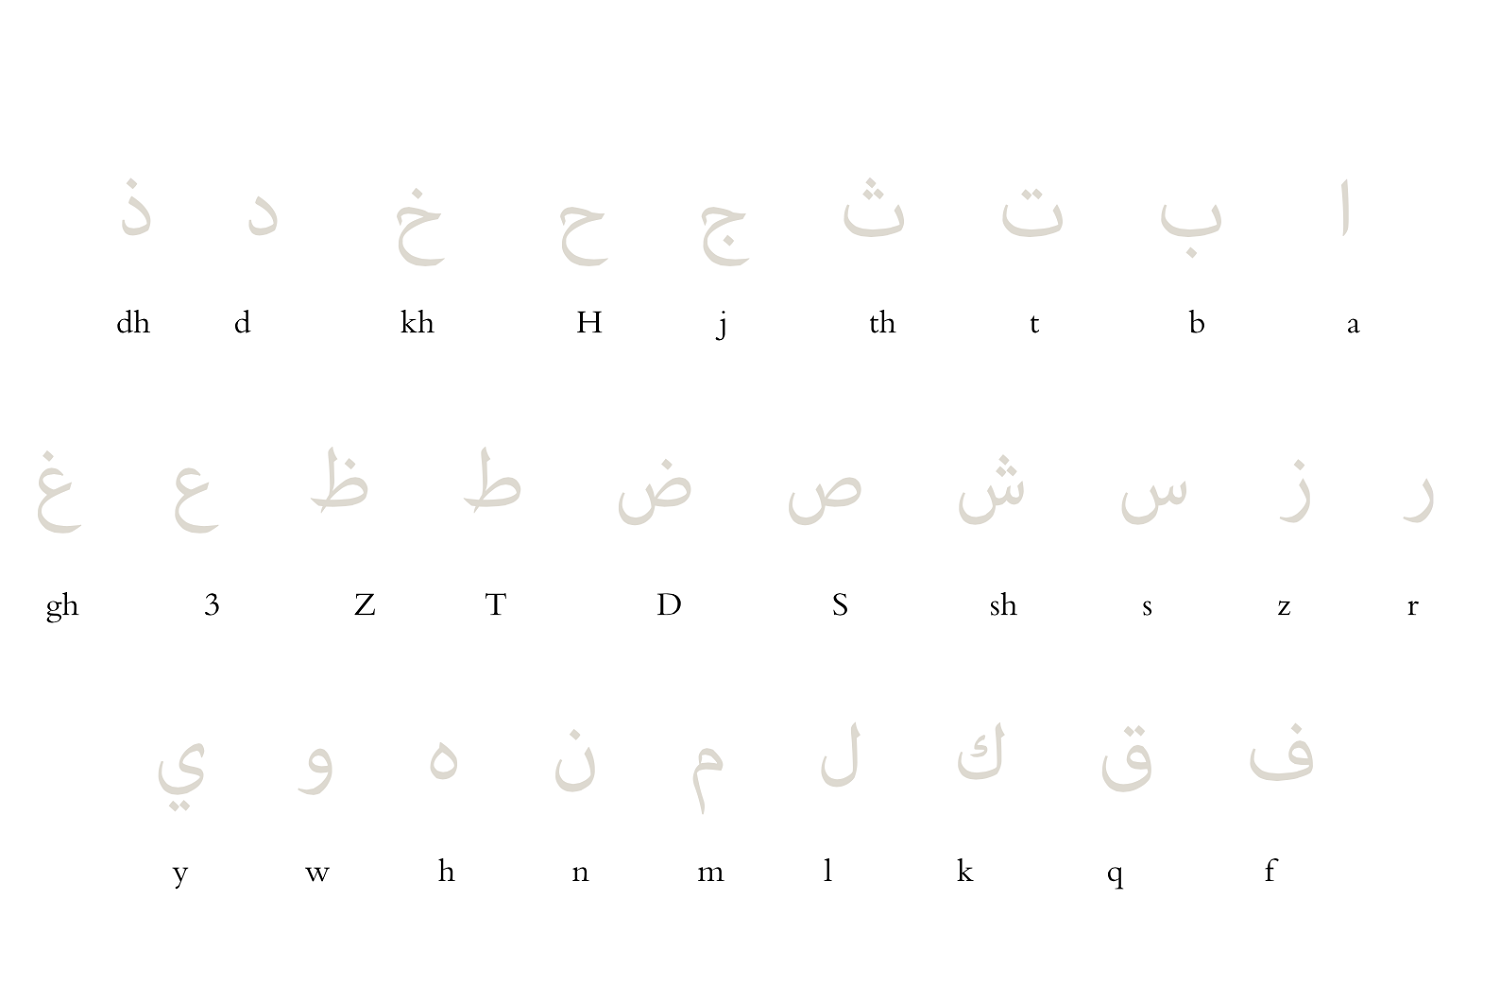 practice-writing-arabic-letters-quran